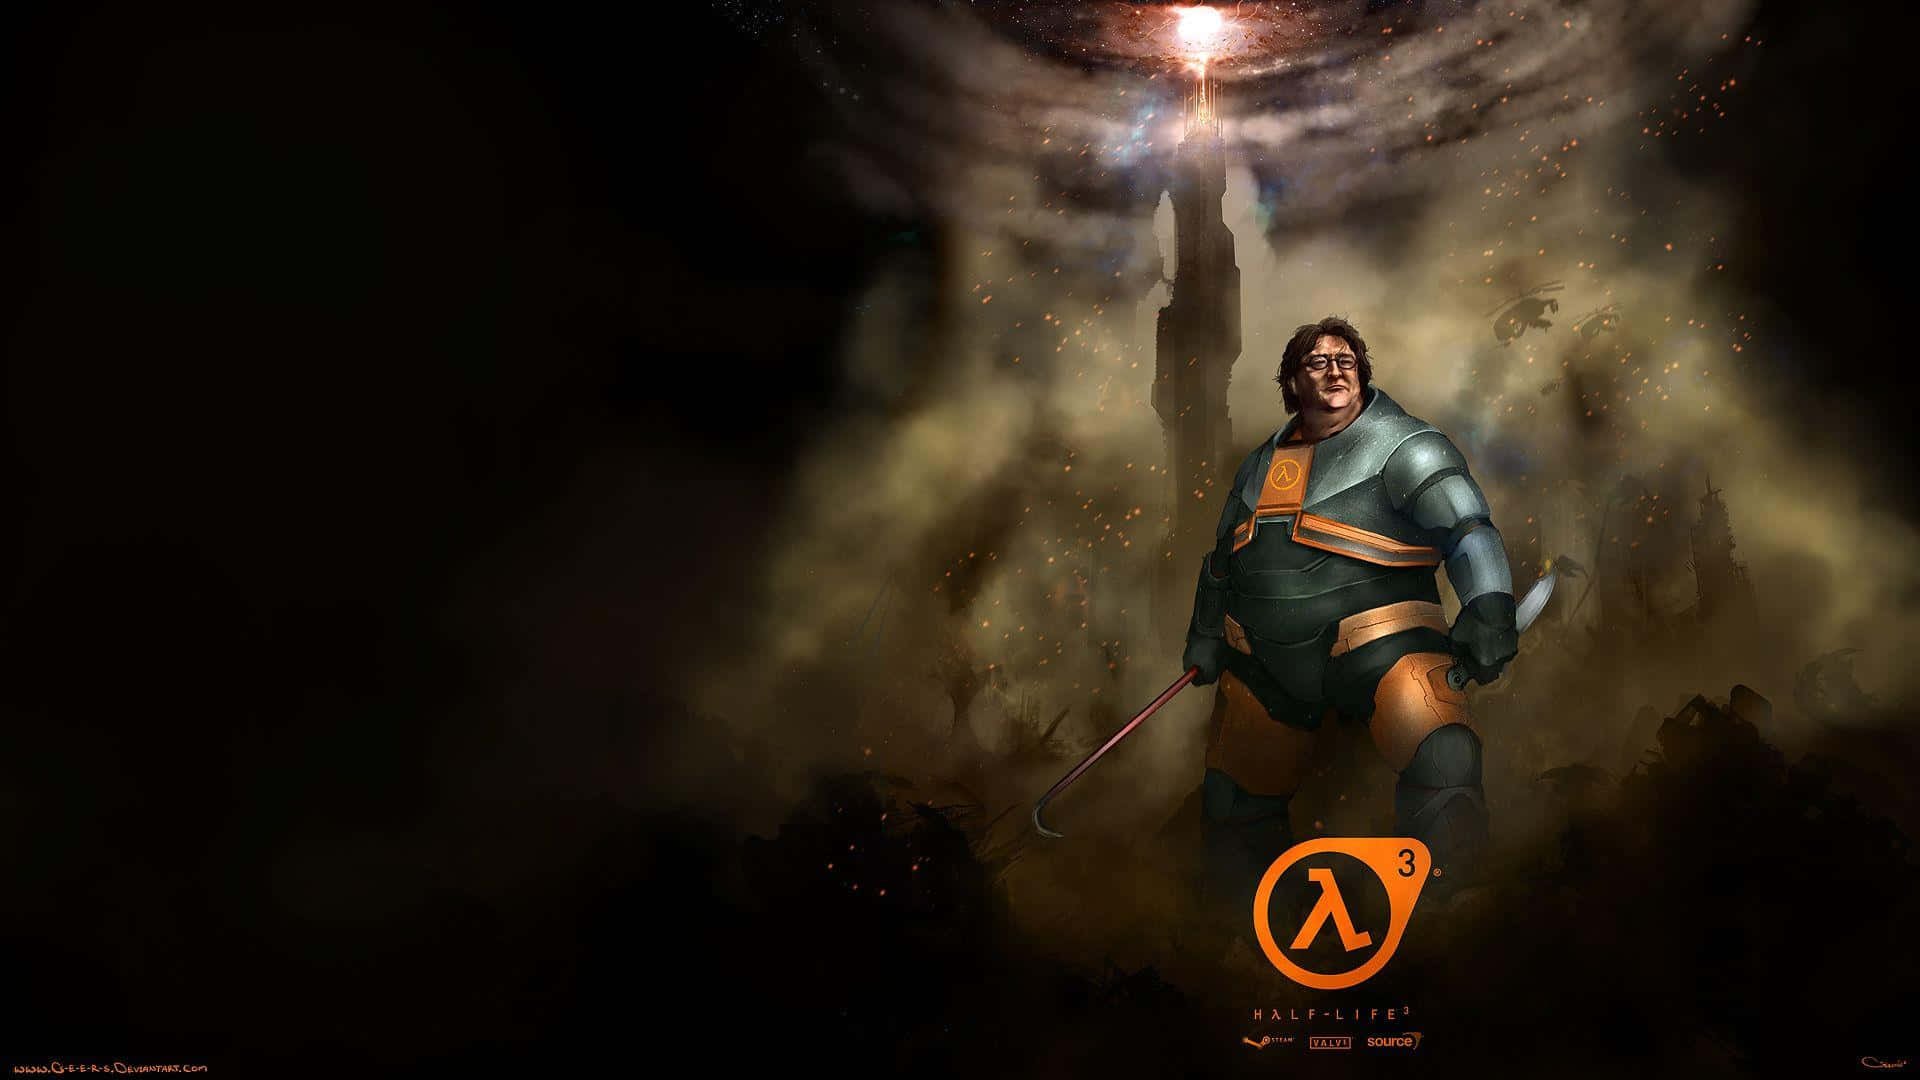 "Experience the Thrill of Half Life 2" Wallpaper